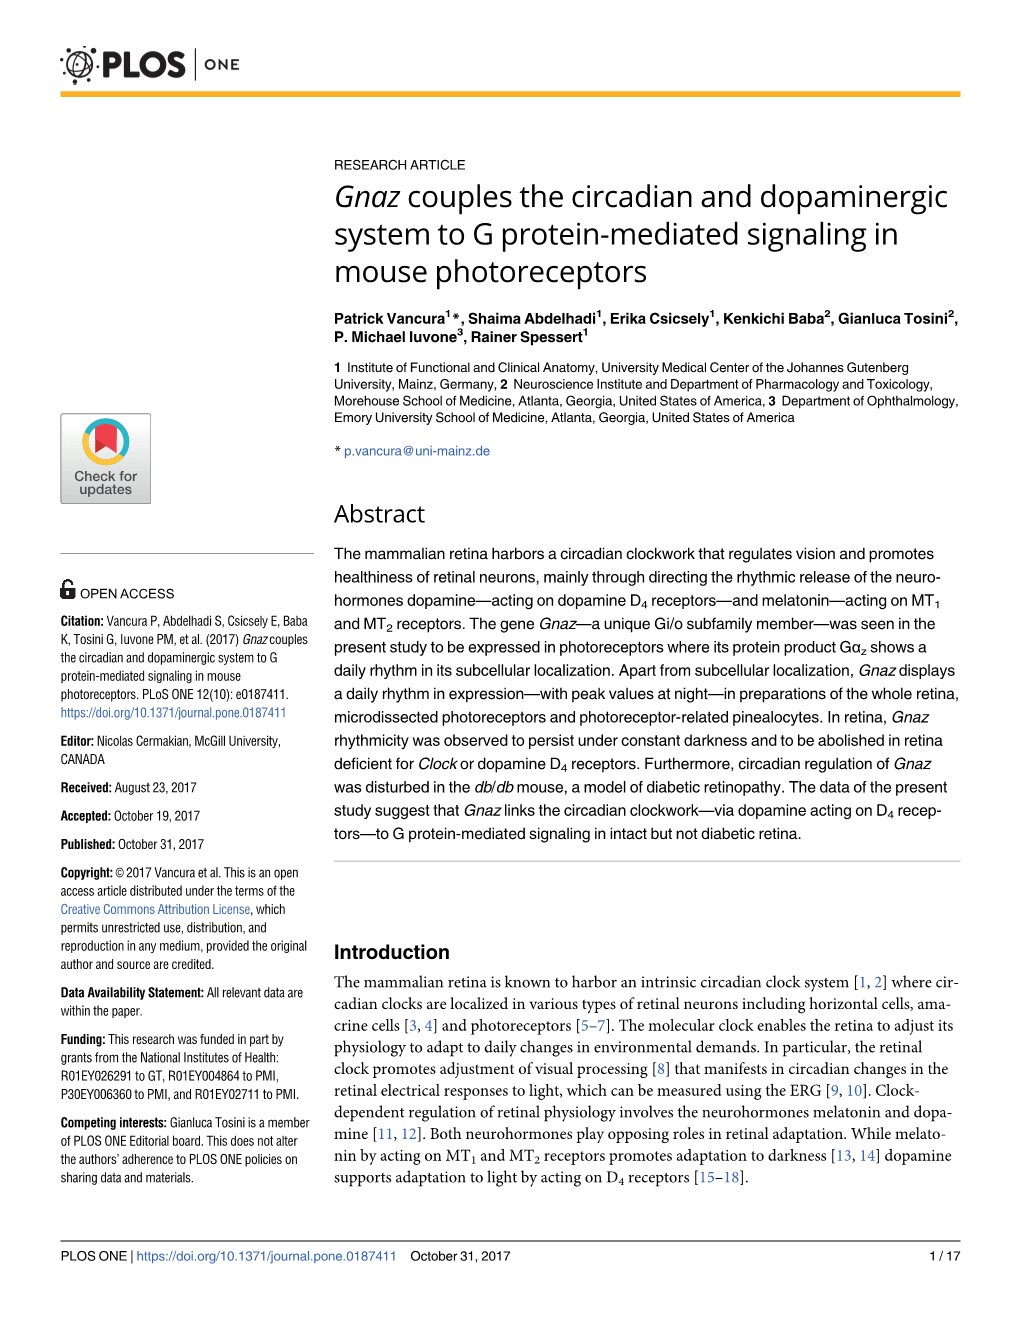 Gnaz Couples the Circadian and Dopaminergic System to G Protein-Mediated Signaling in Mouse Photoreceptors